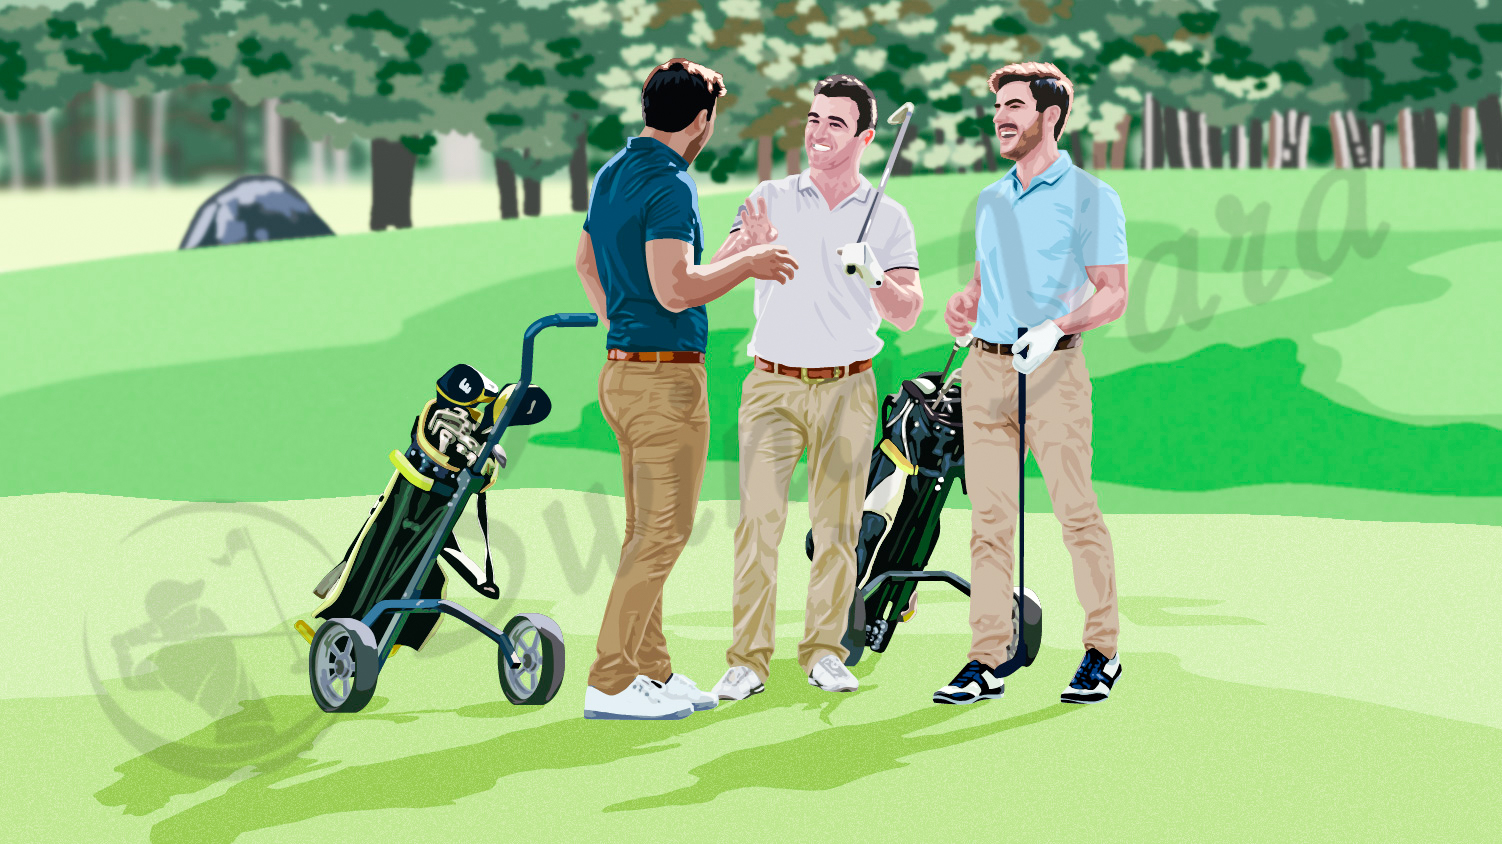 Three men with golf bags playing golf